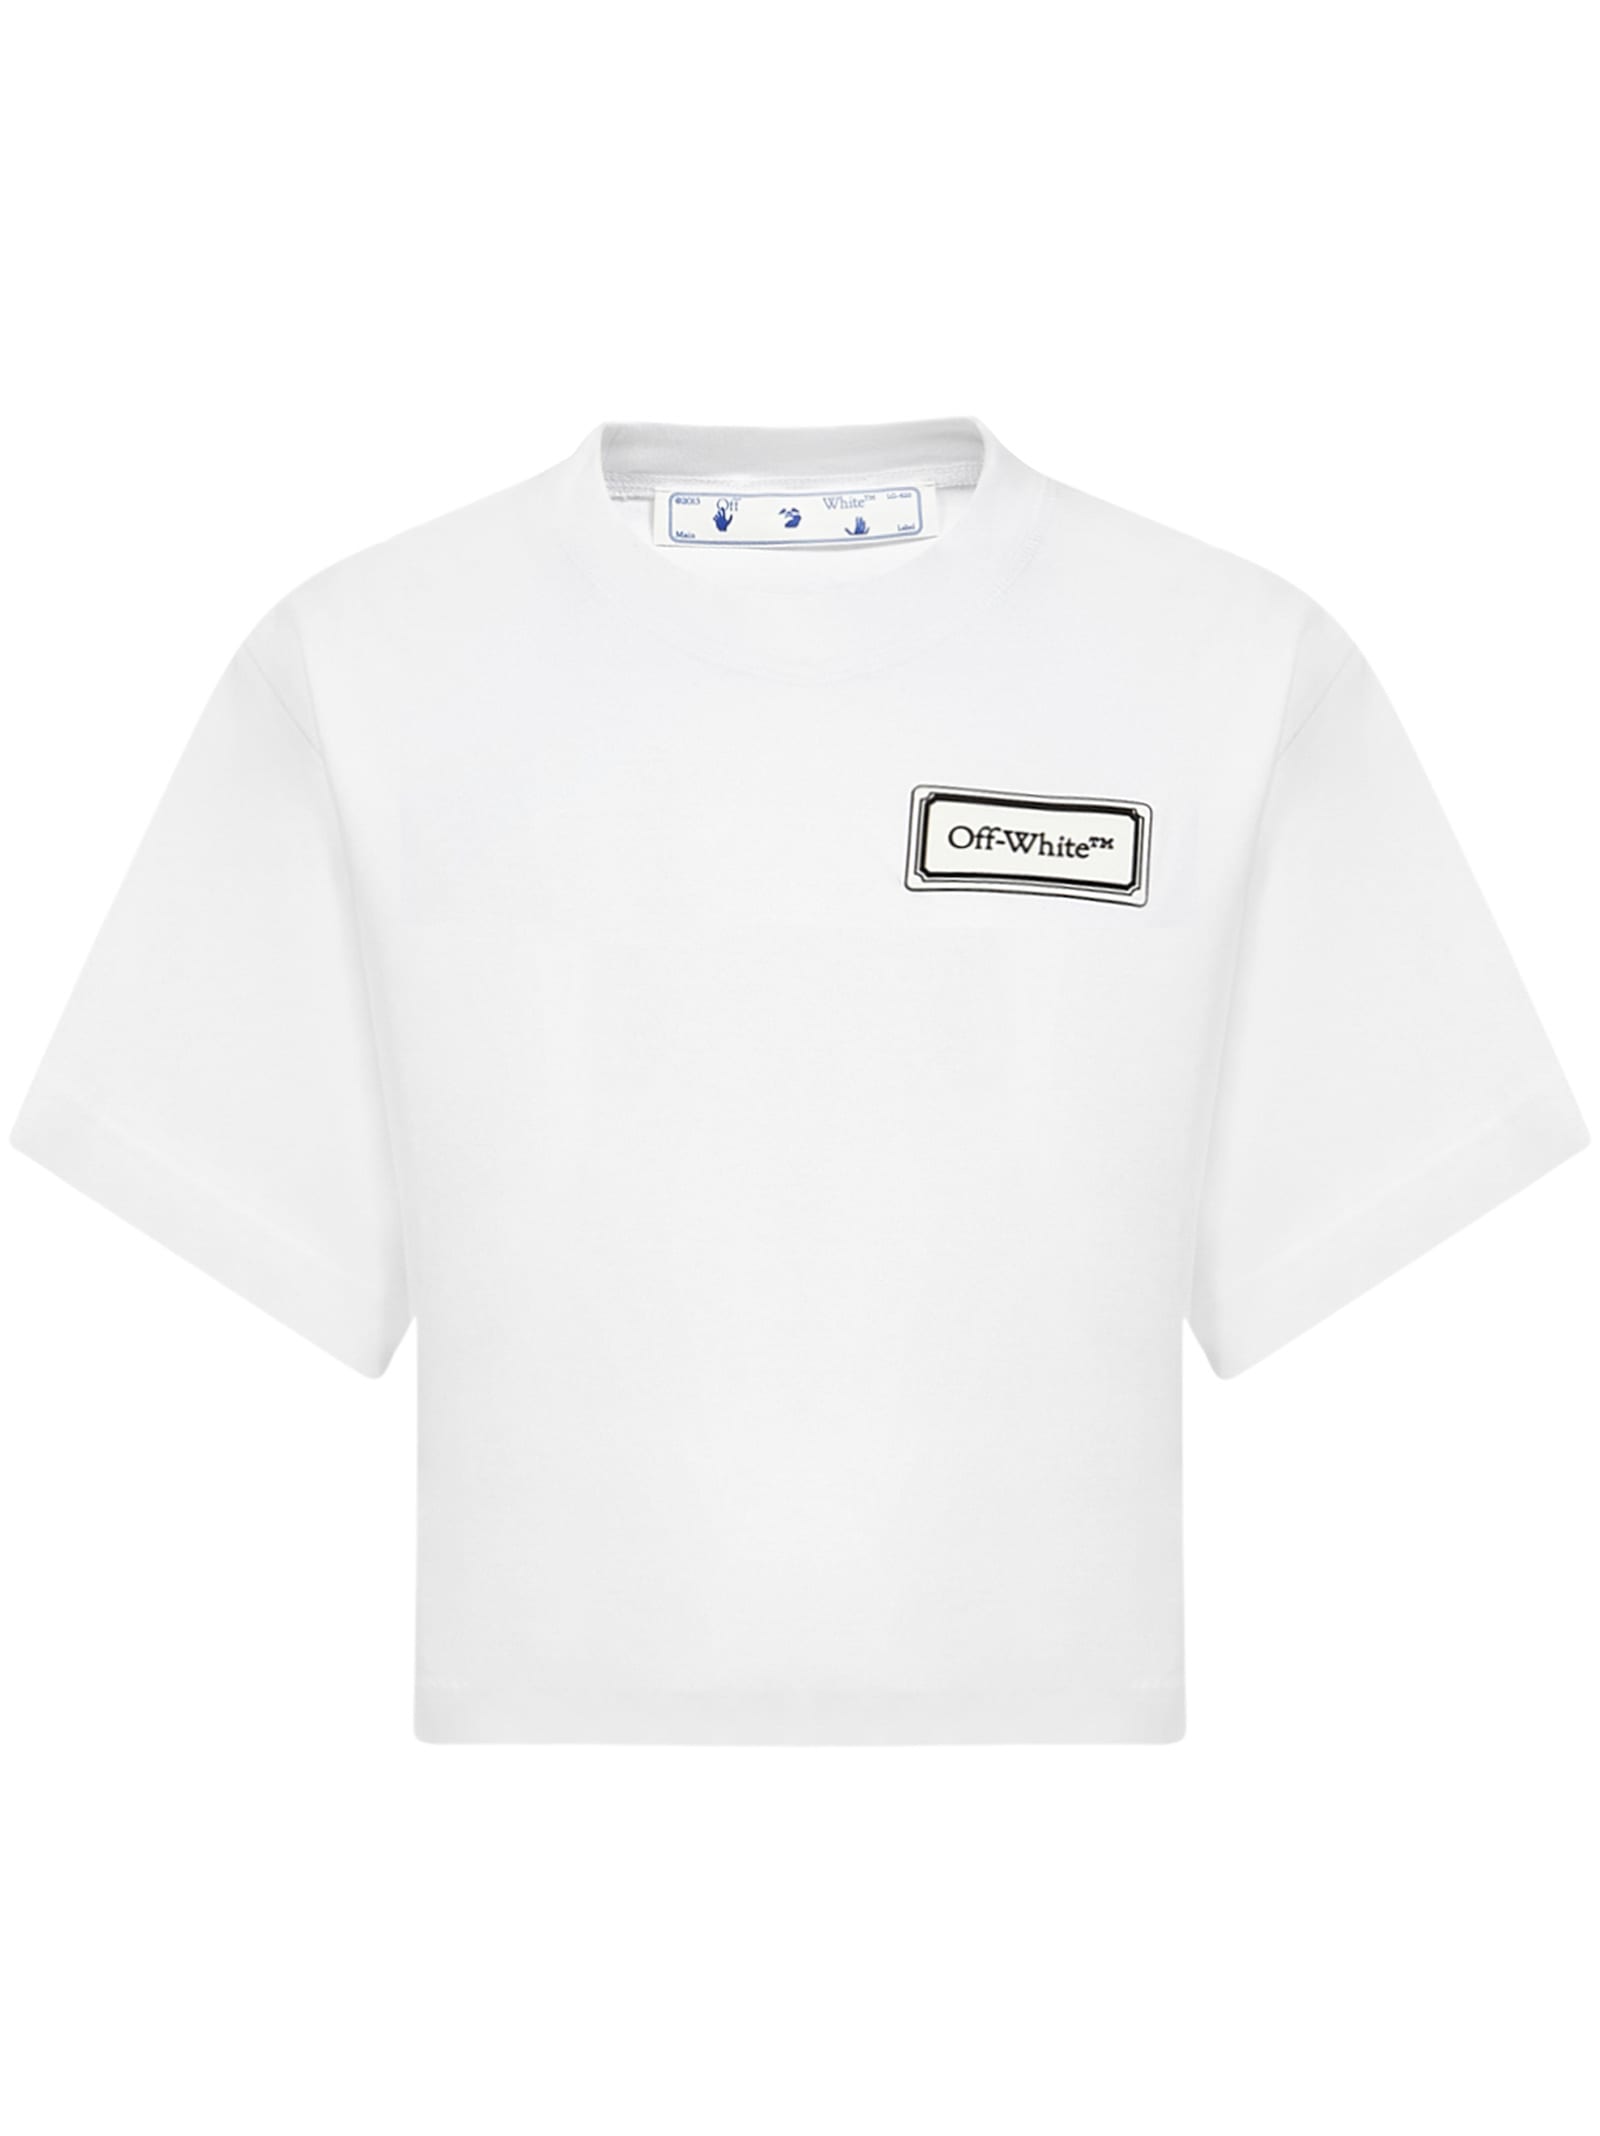 OFF-WHITE OFF-WHITE T-SHIRT,OWAA090S21JER004 0110